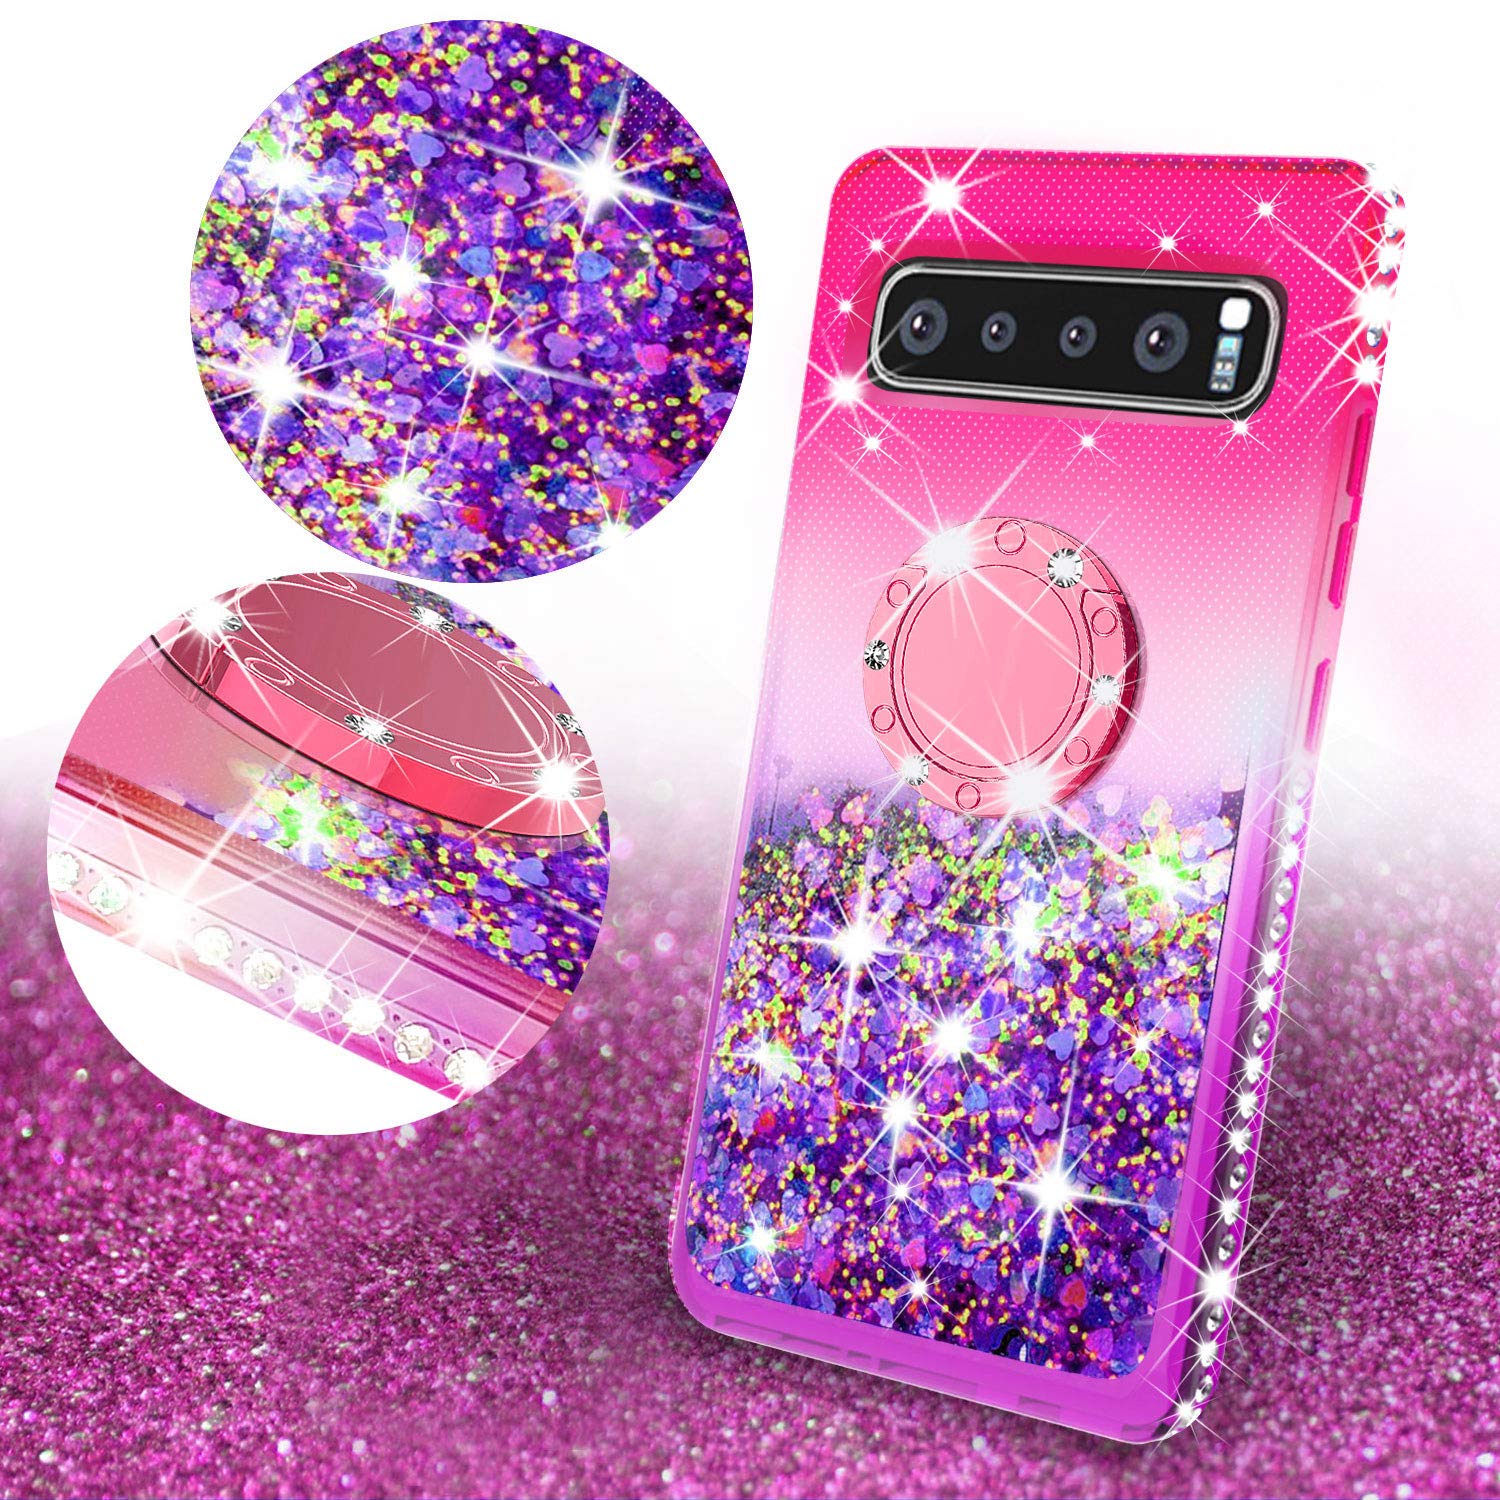 For Samsung Galaxy S10 Case,Ring Stand Glitter Liquid Quicksand Waterfall Floating Sparkle Shiny Bling Diamond Girls Cute Shock Proof Phone Case Cover for Galaxy S10 - Hot Pink/Blue - image 5 of 5